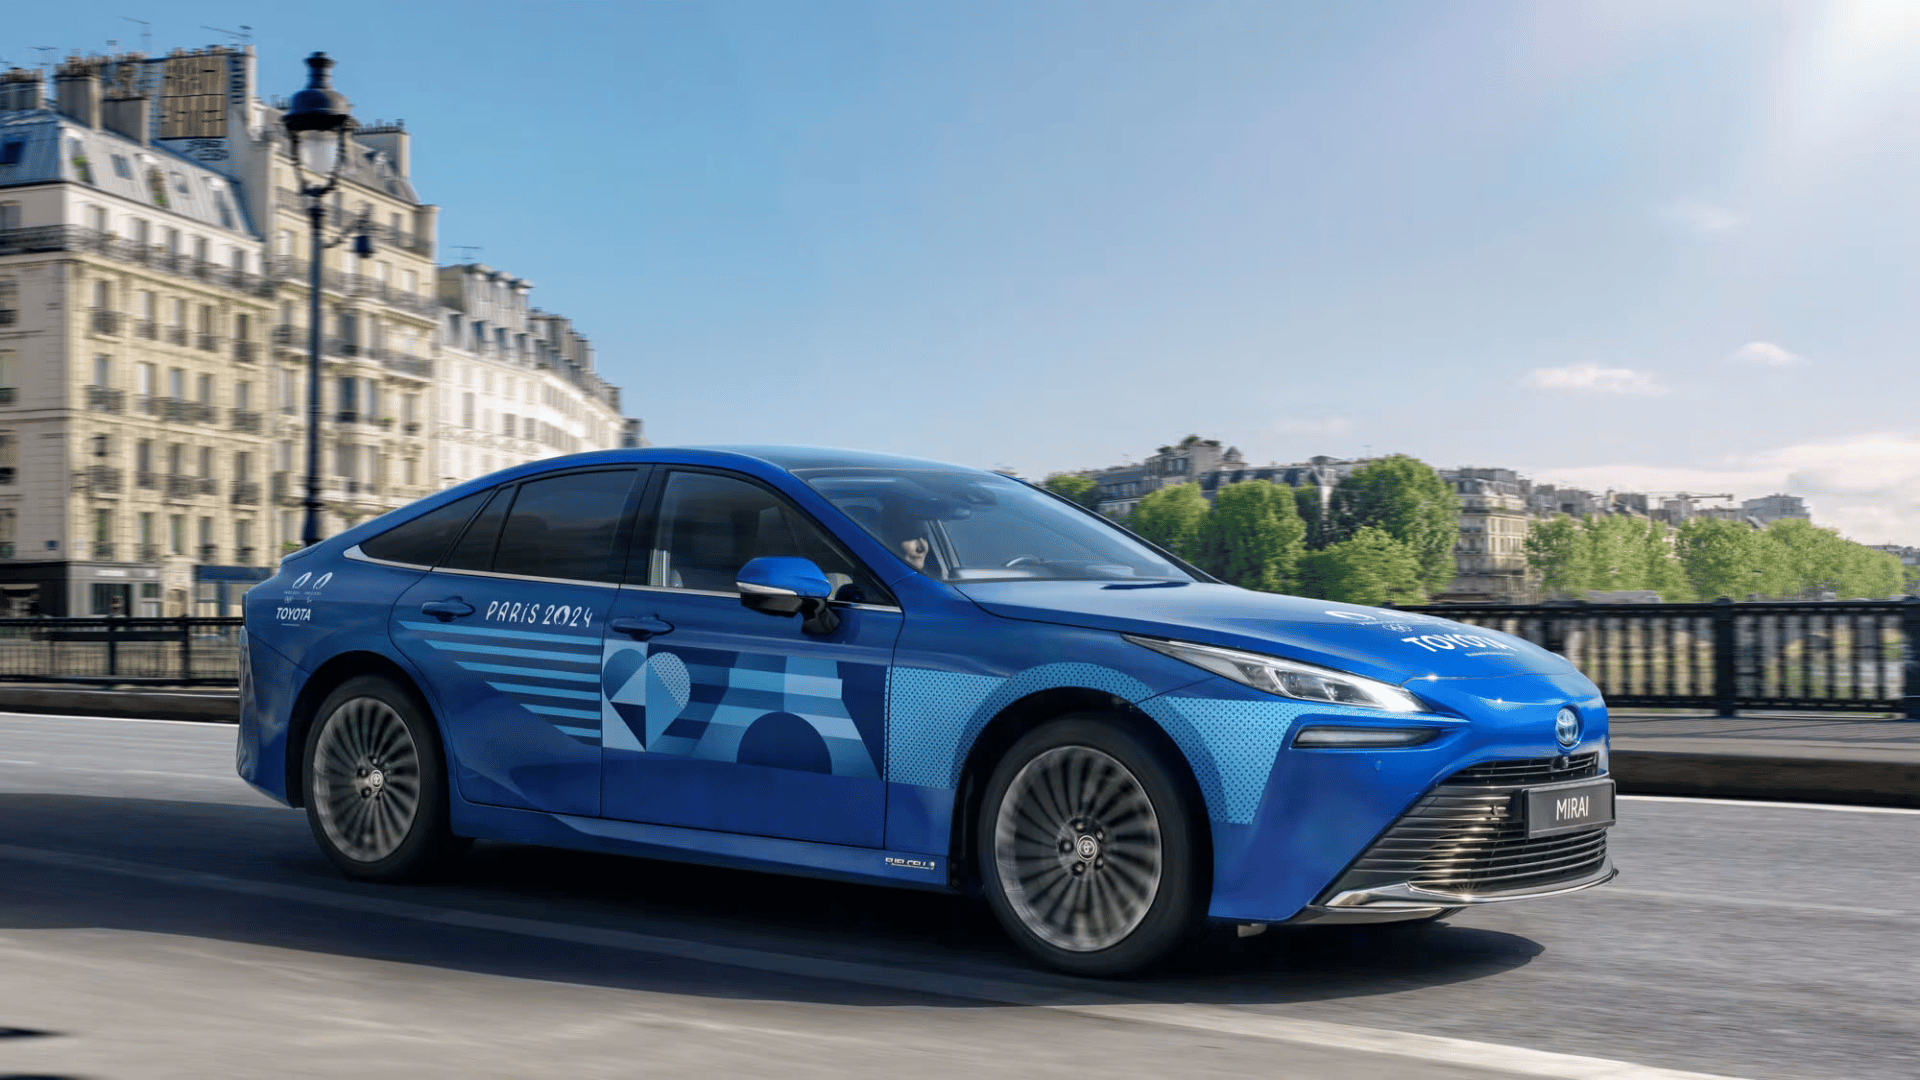 Sustainable vehicles at the 2024 Paris Olympic Games; Photo: © Toyota